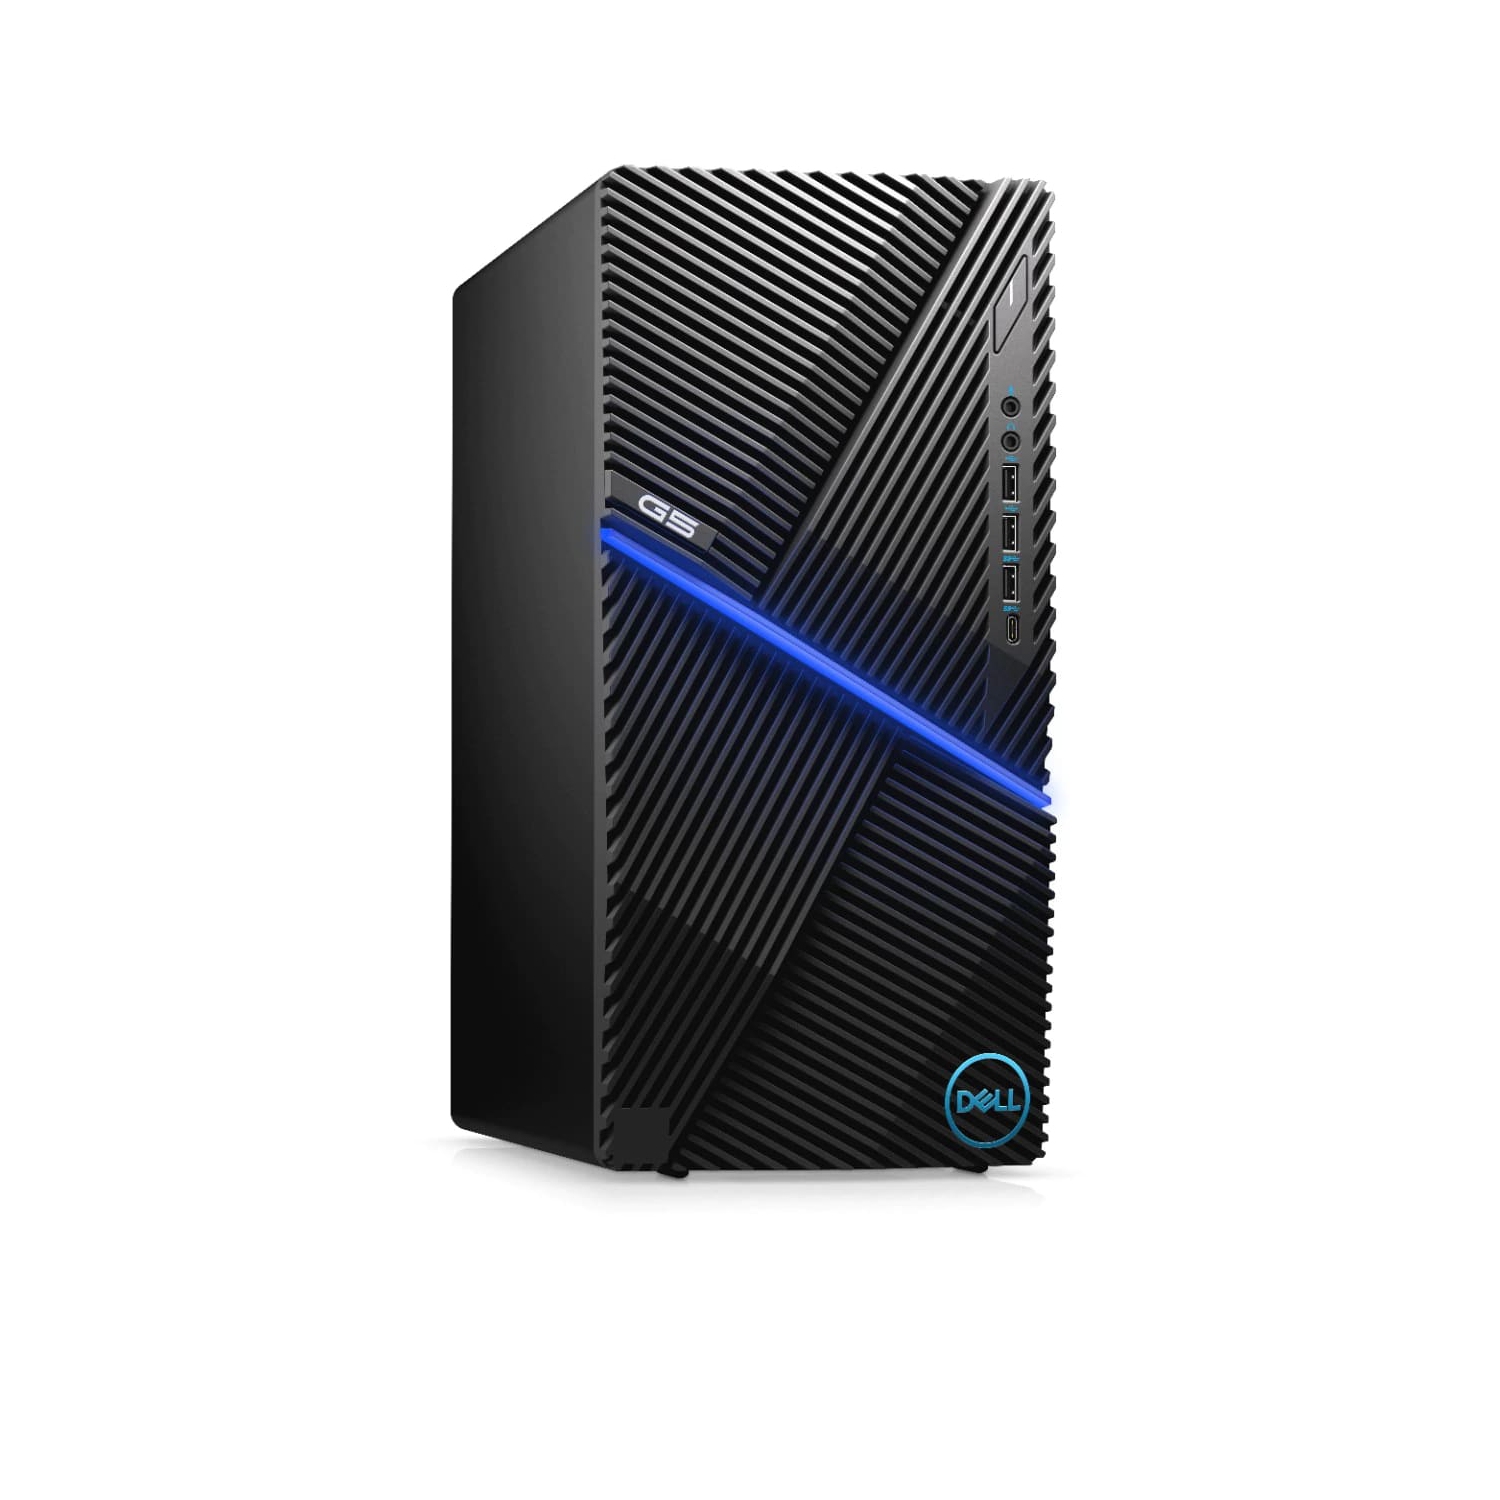 Refurbished (Excellent) - Dell G5 5000 Gaming Desktop (2020) | Core i5 - 1TB SSD - 16GB RAM - RTX 3060 | 6 Cores @ 4.8 GHz - 10th Gen CPU Certified Refurbished